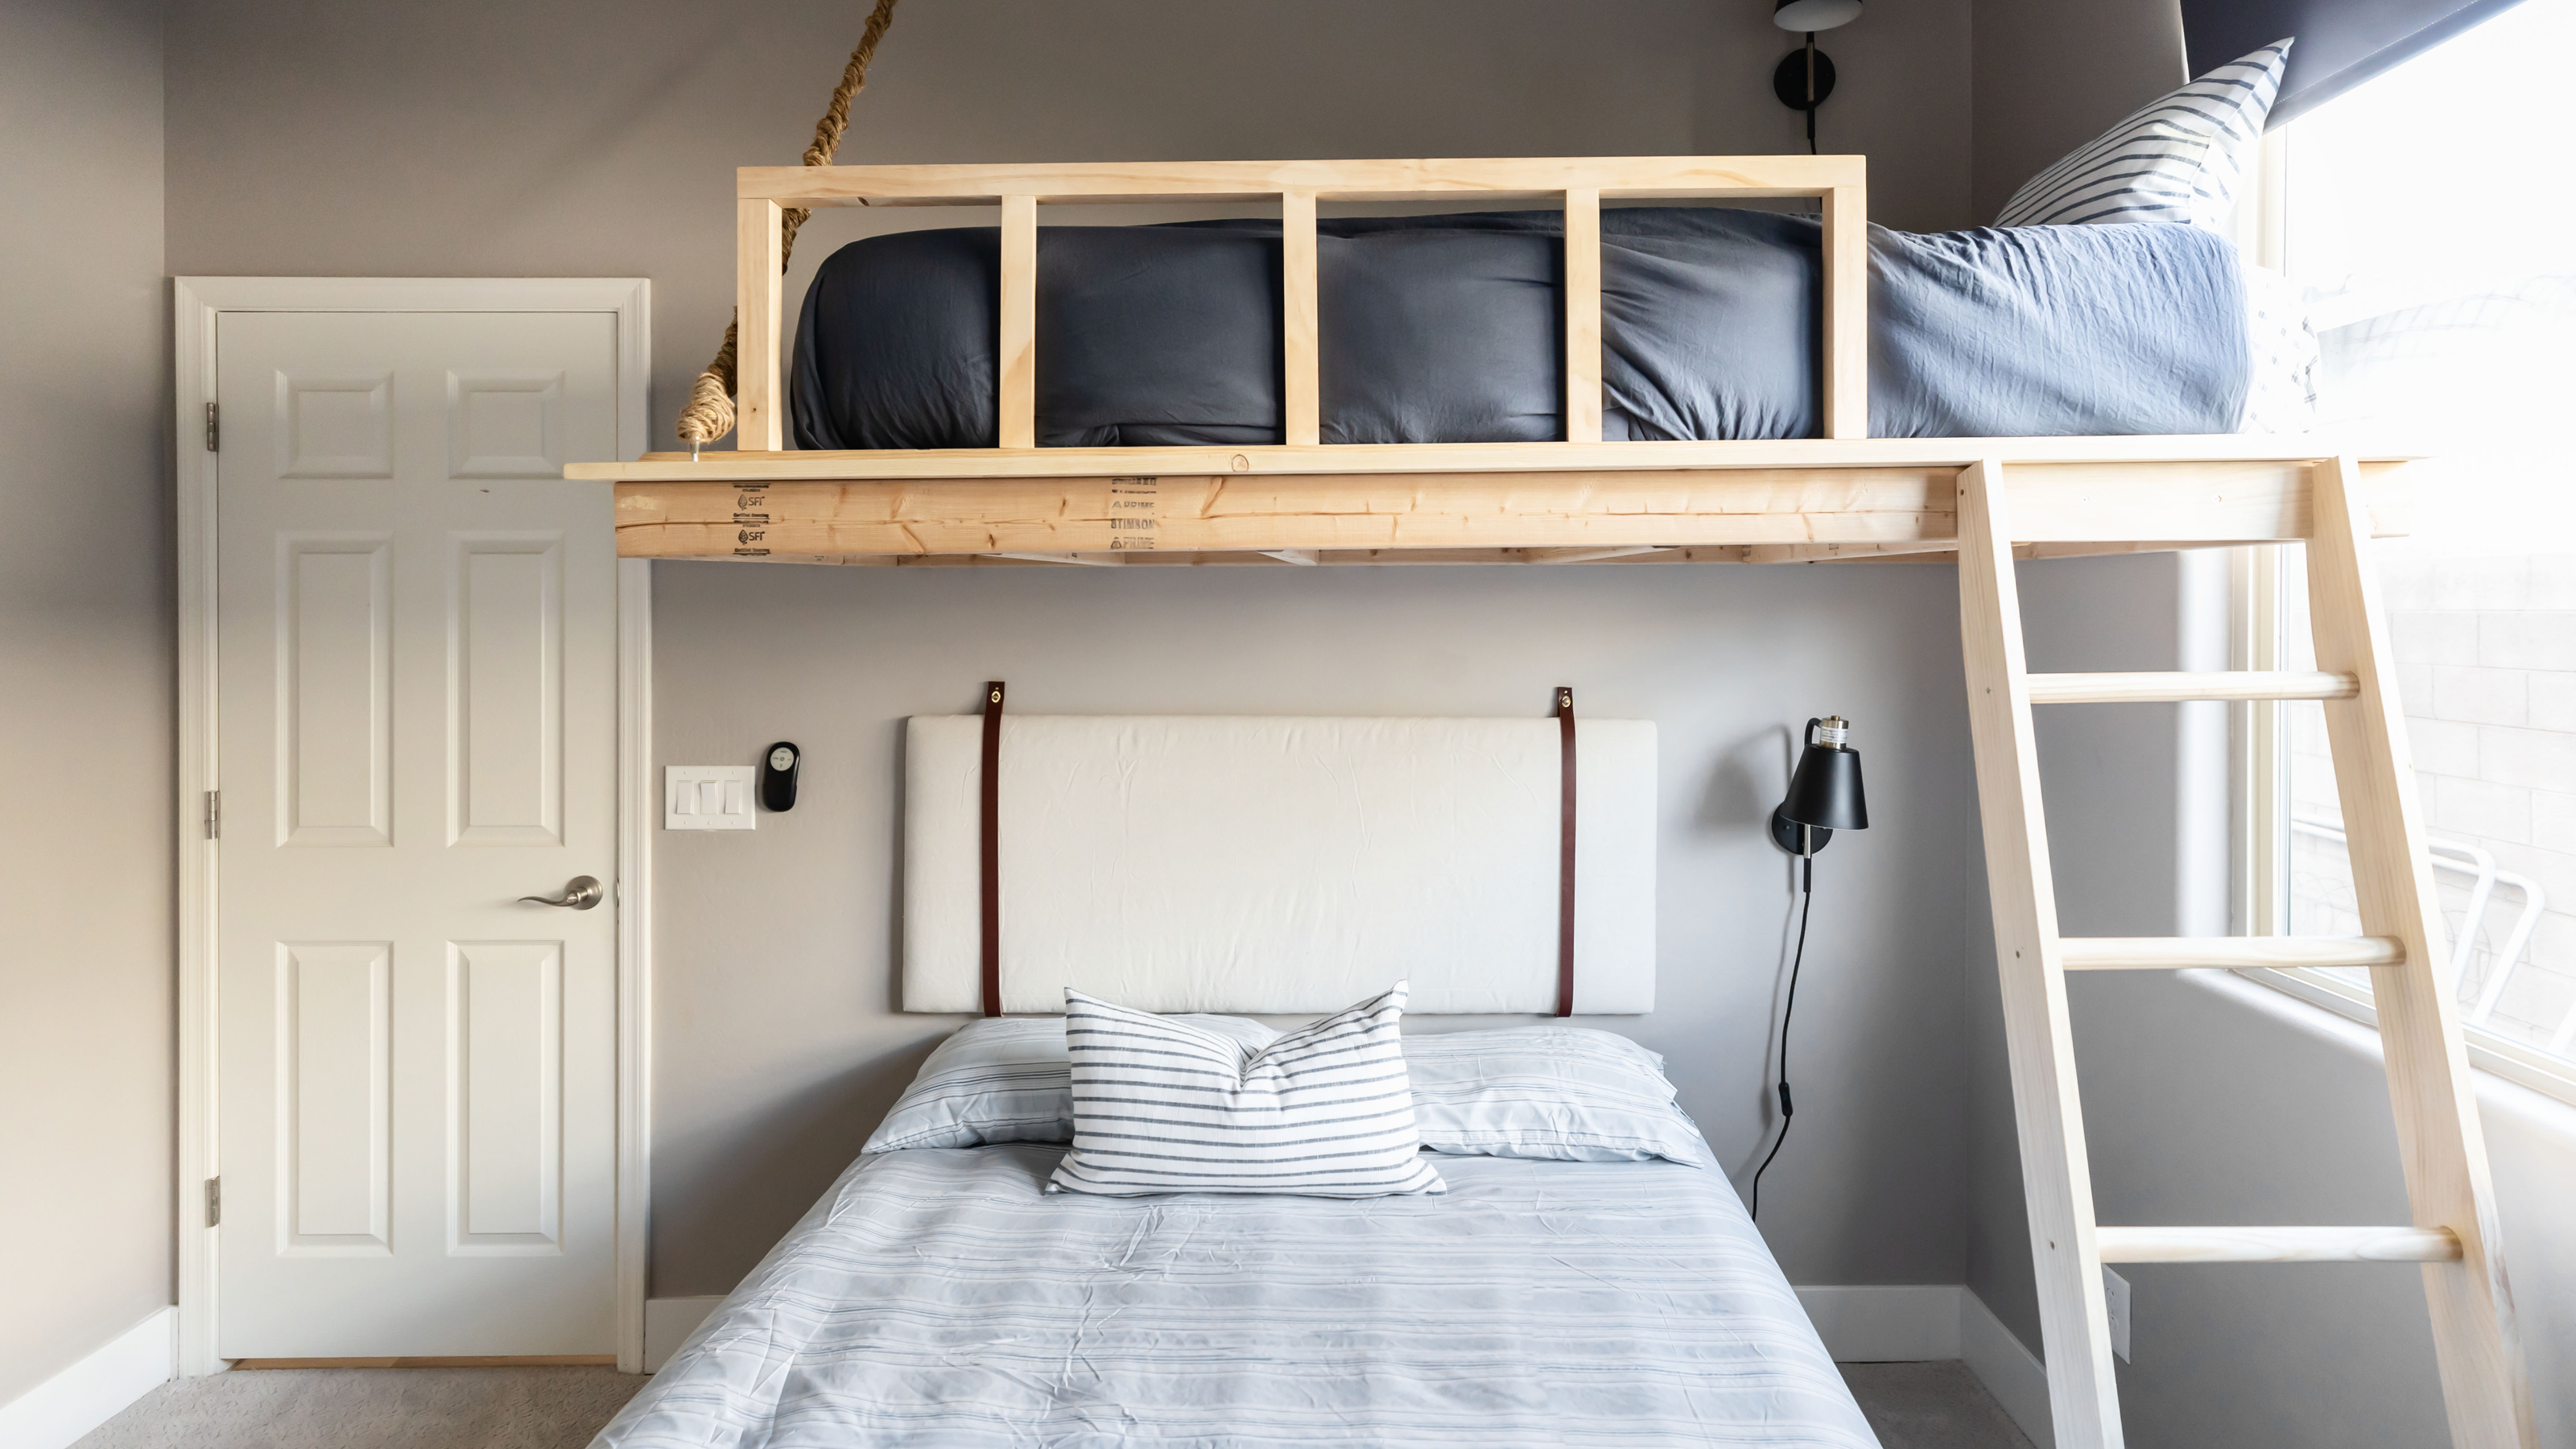 How To Build A Loft Bed Diy With This, Making A Bunk Bed Into A Loft Bed